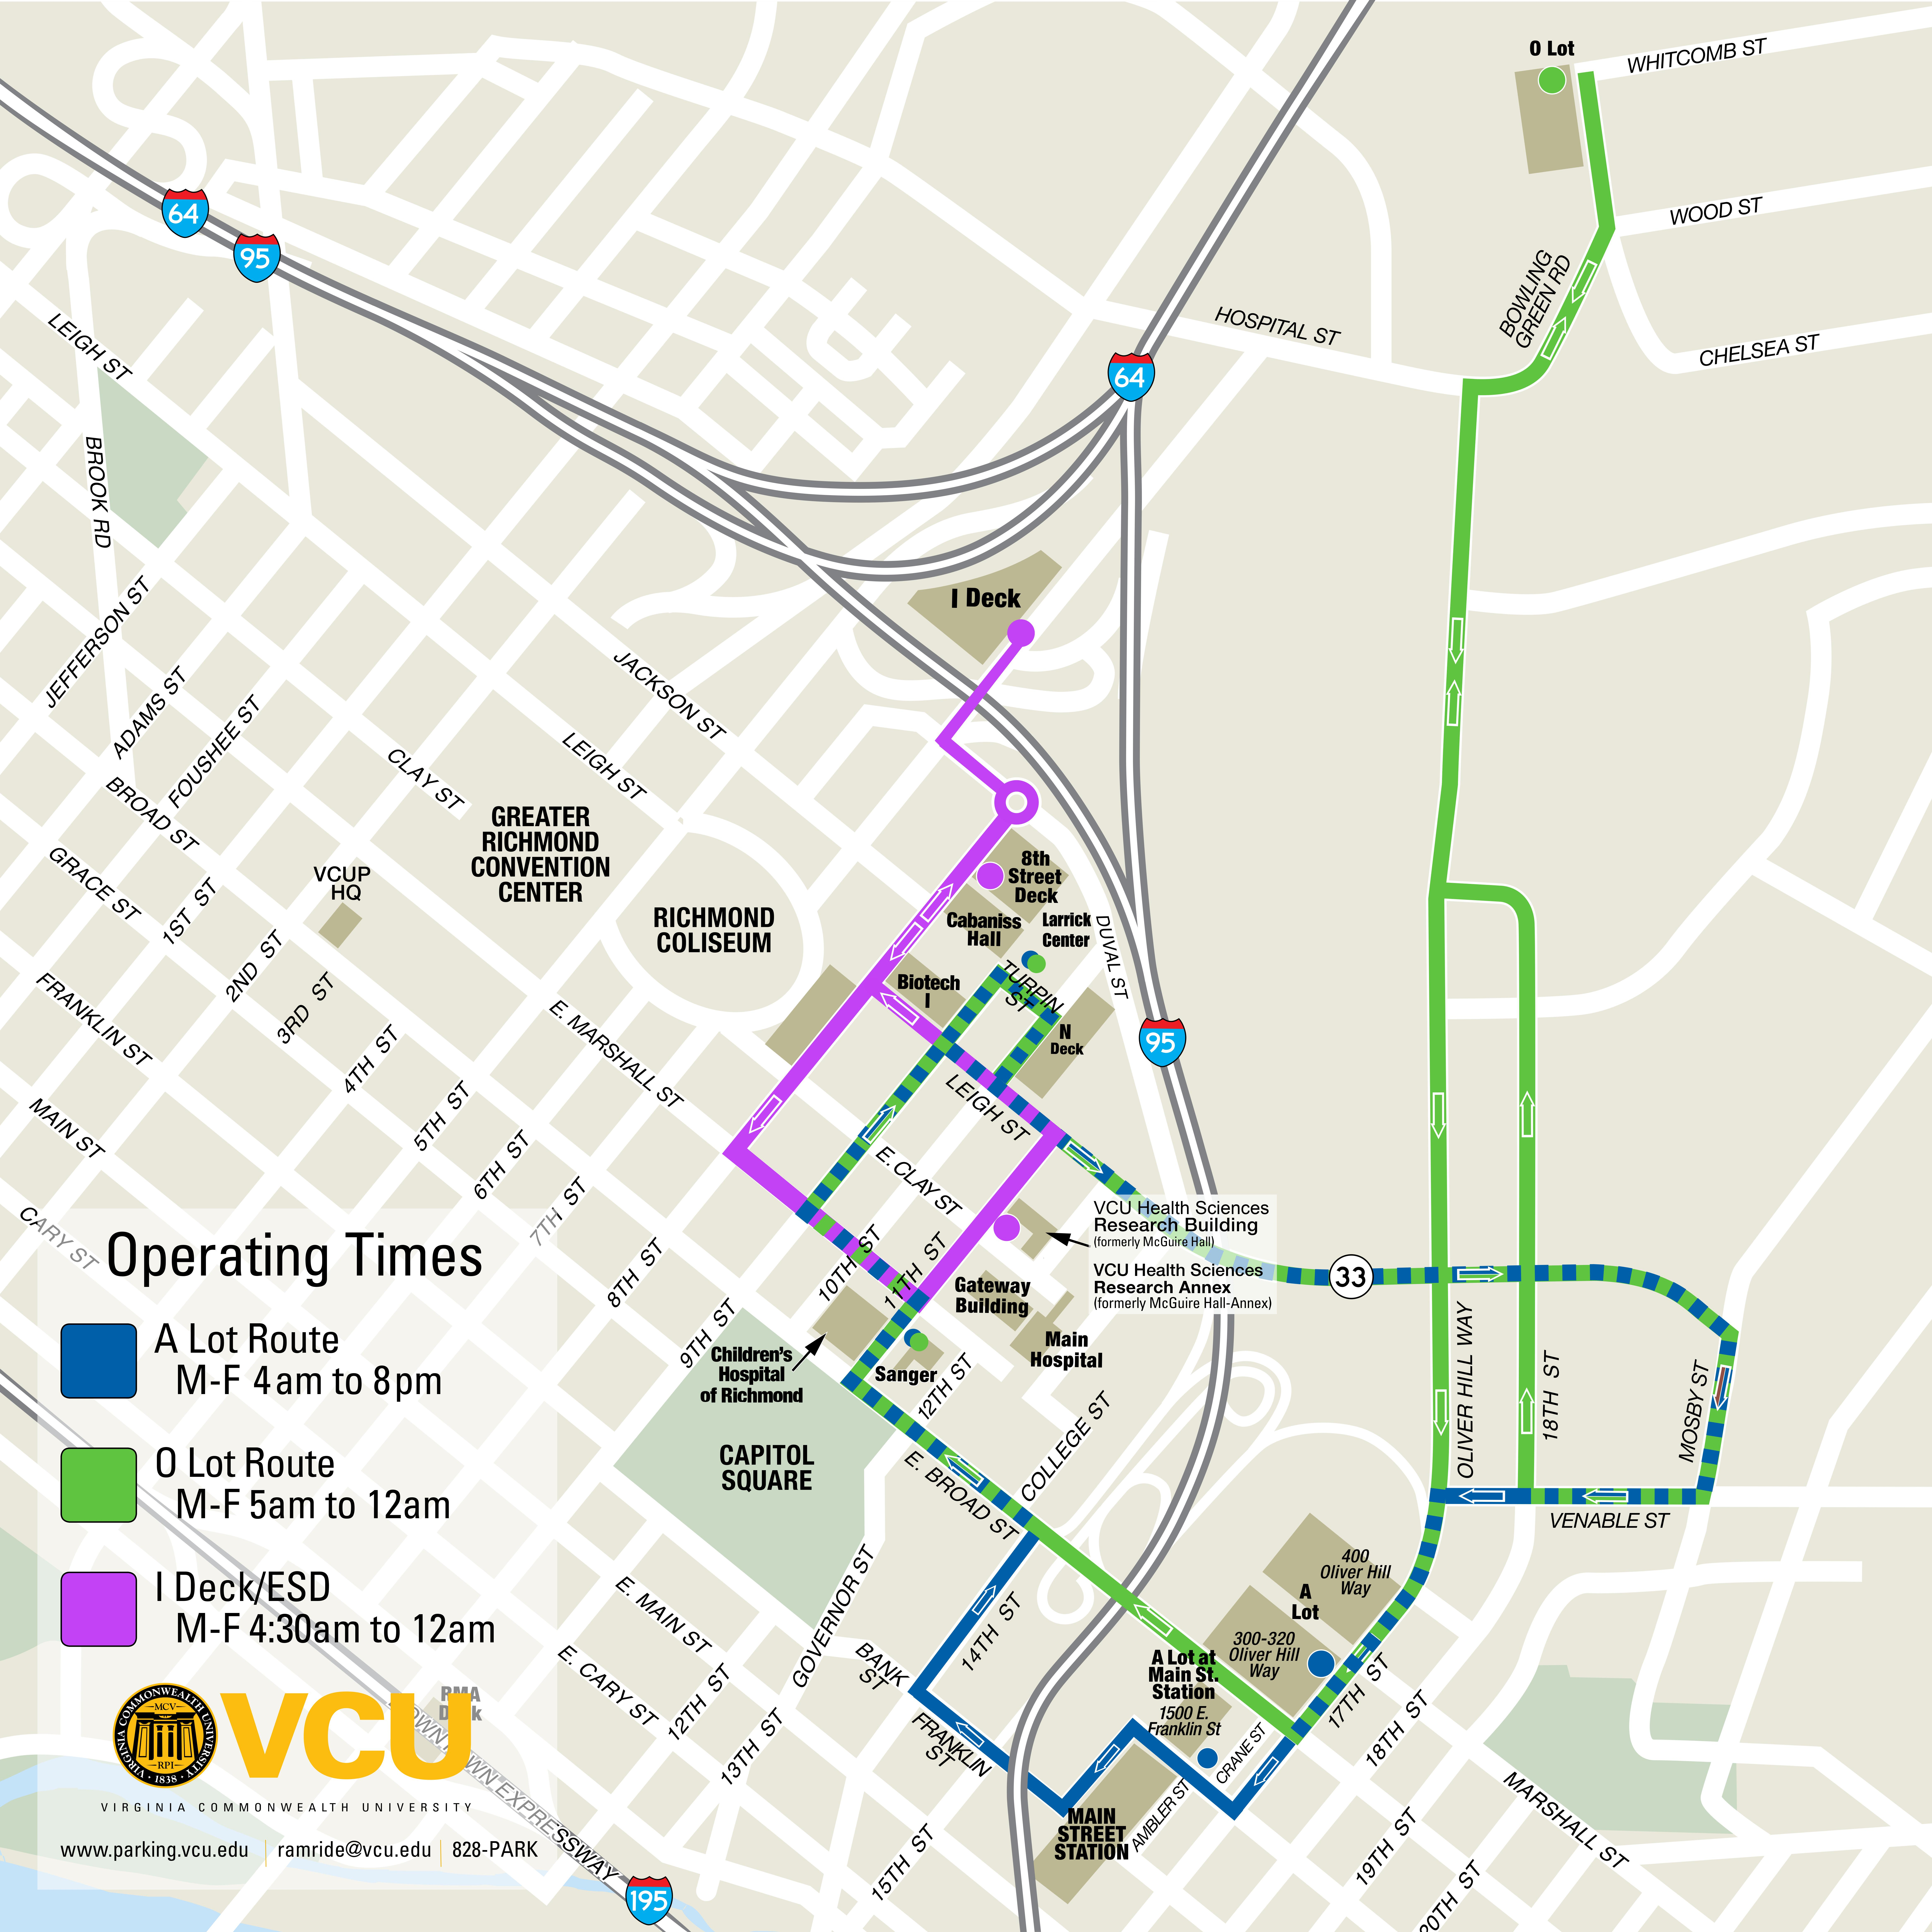 RamRide map; route details available at https://apps.parking.vcu.edu/ramridetext.aspx#RT_1